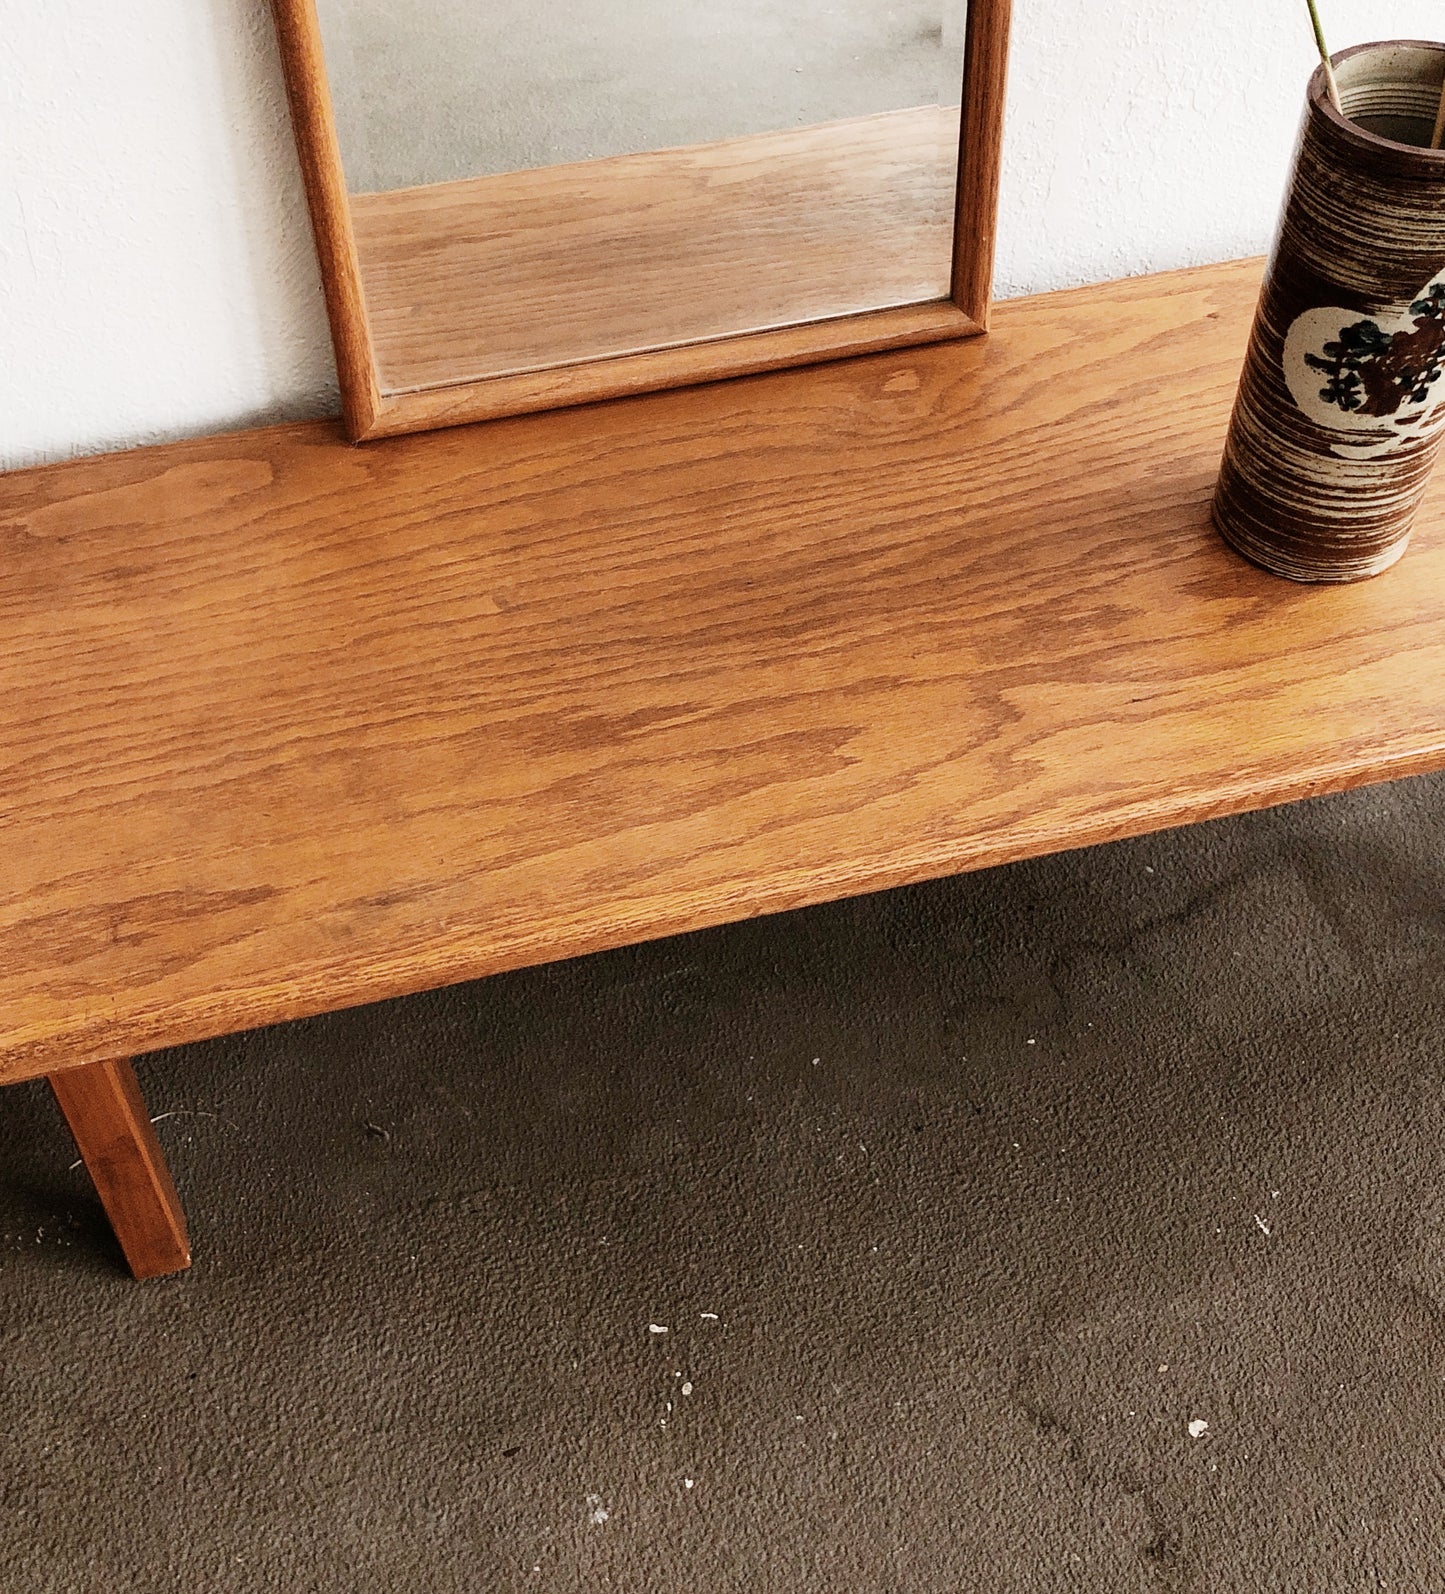 Vintage Oak Bench or Coffee Table